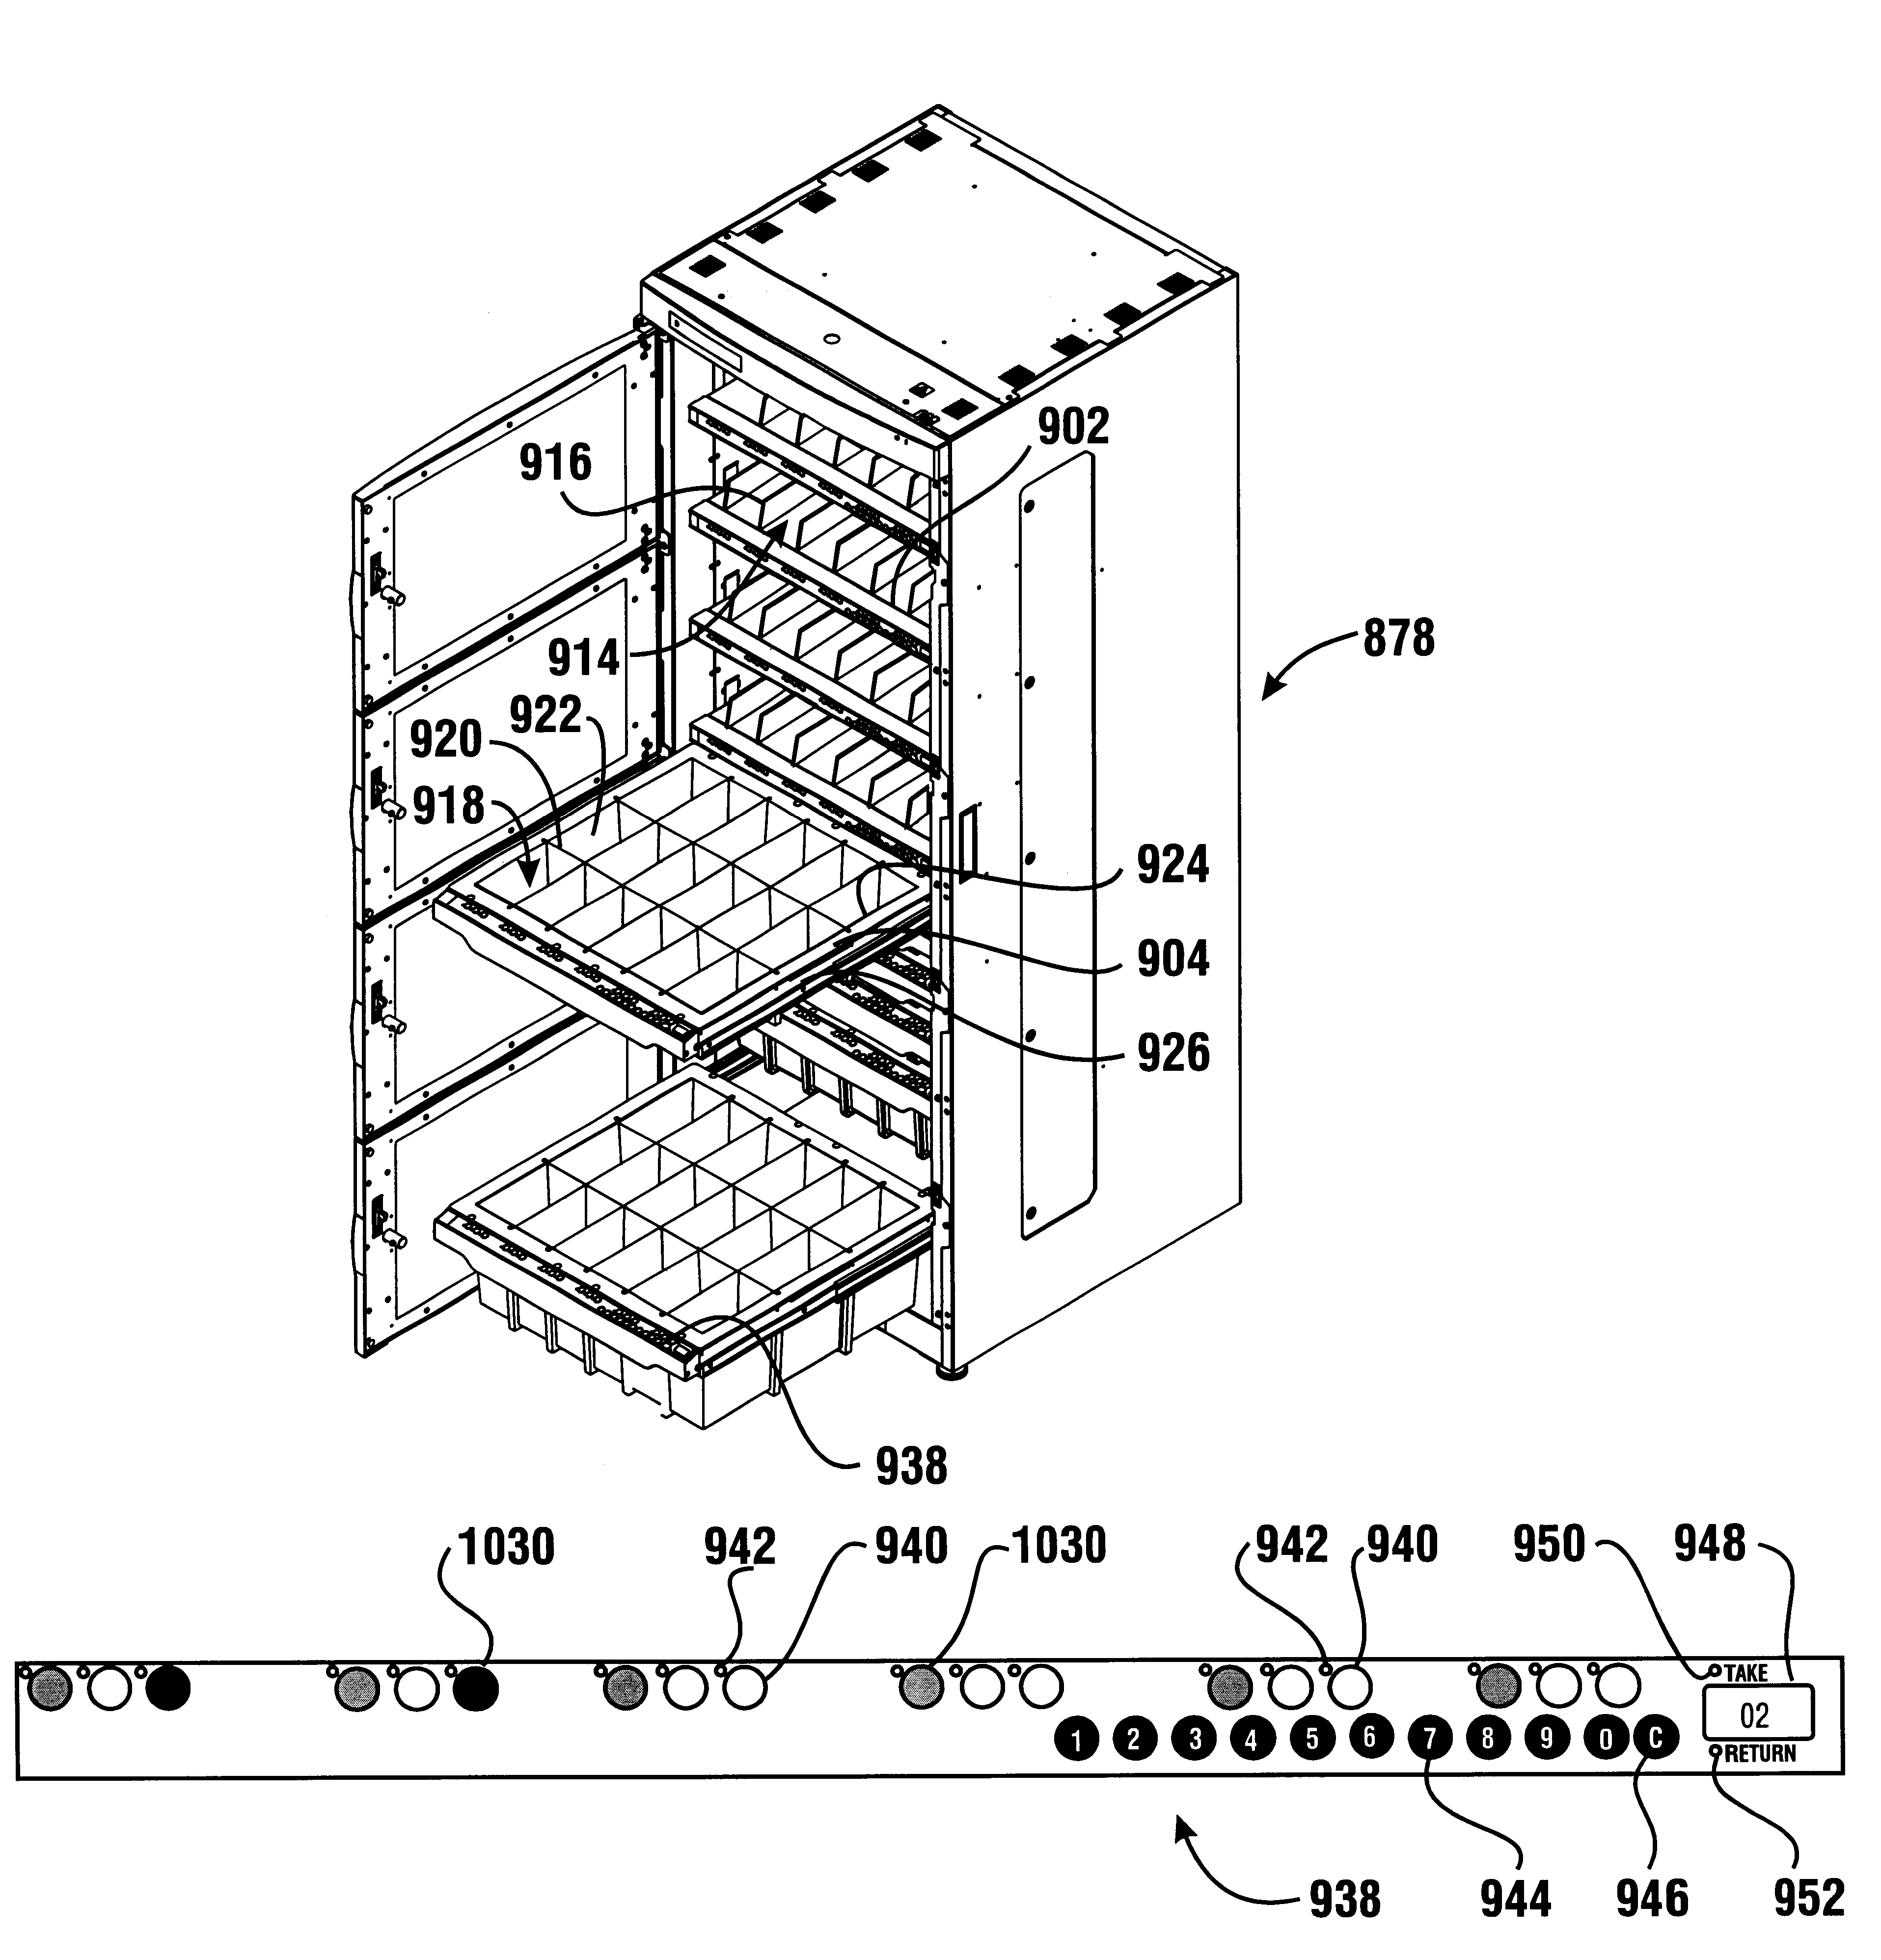 System and method for tracking medical items and supplies